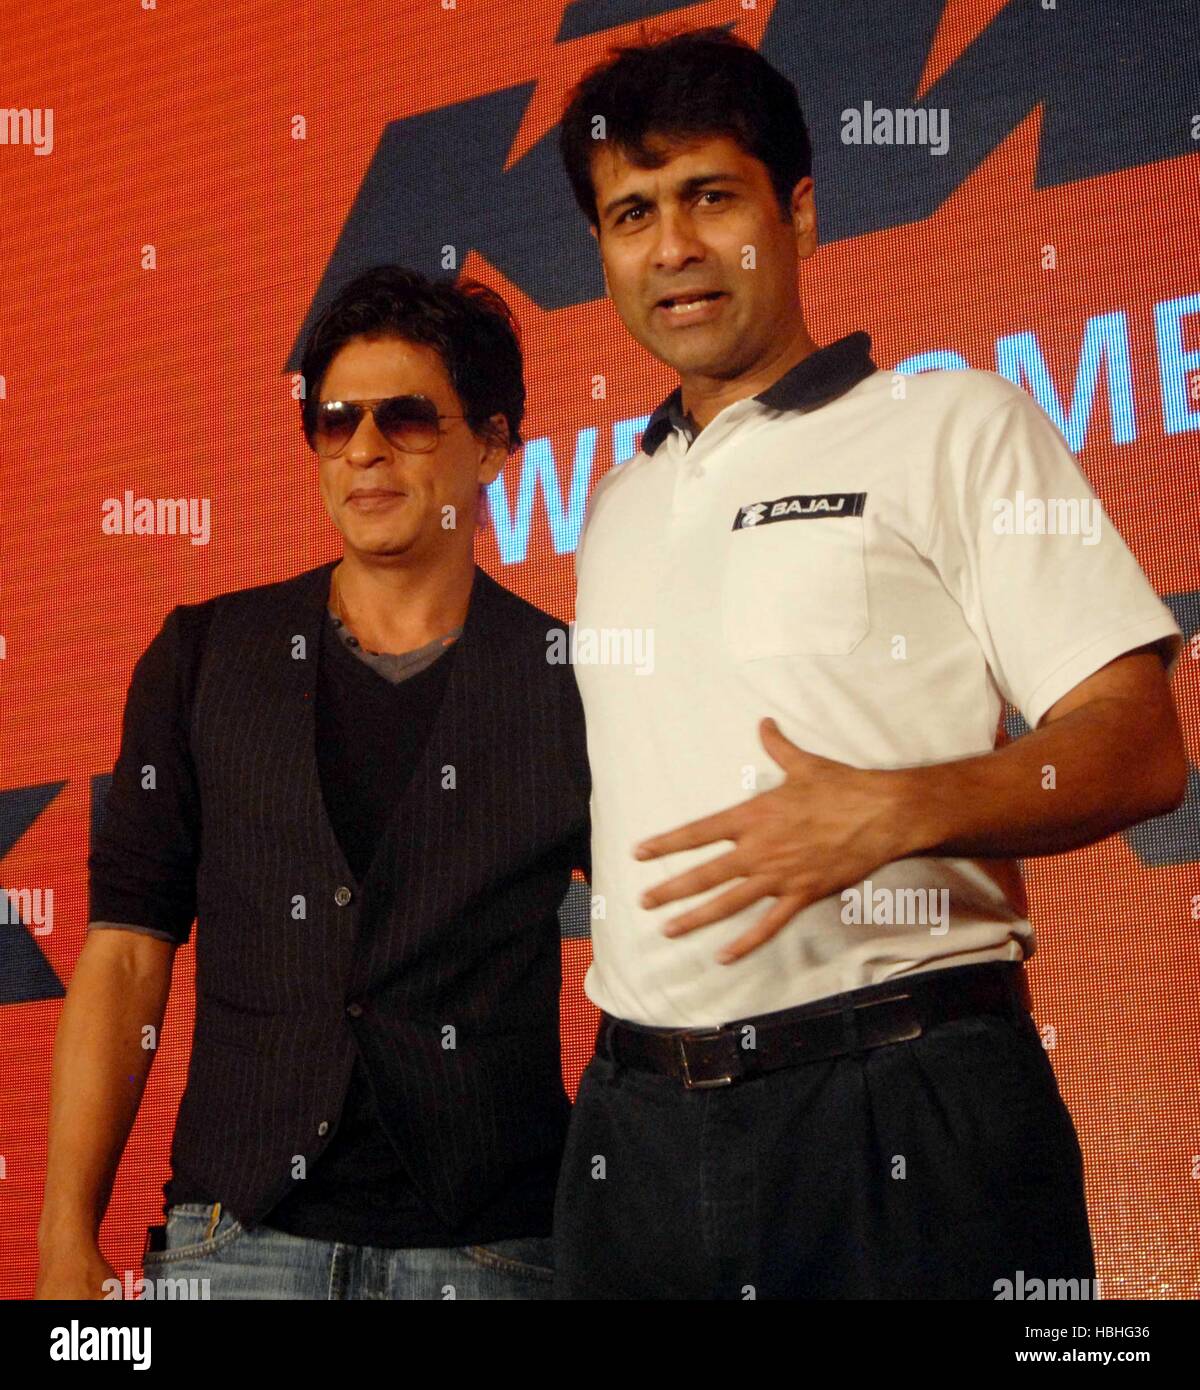 Shah Rukh Khan, Indian Bollywood actor with Rajiv Bajaj, MD, Bajaj Auto at conference of KTM Motorcycles in Pune India Stock Photo